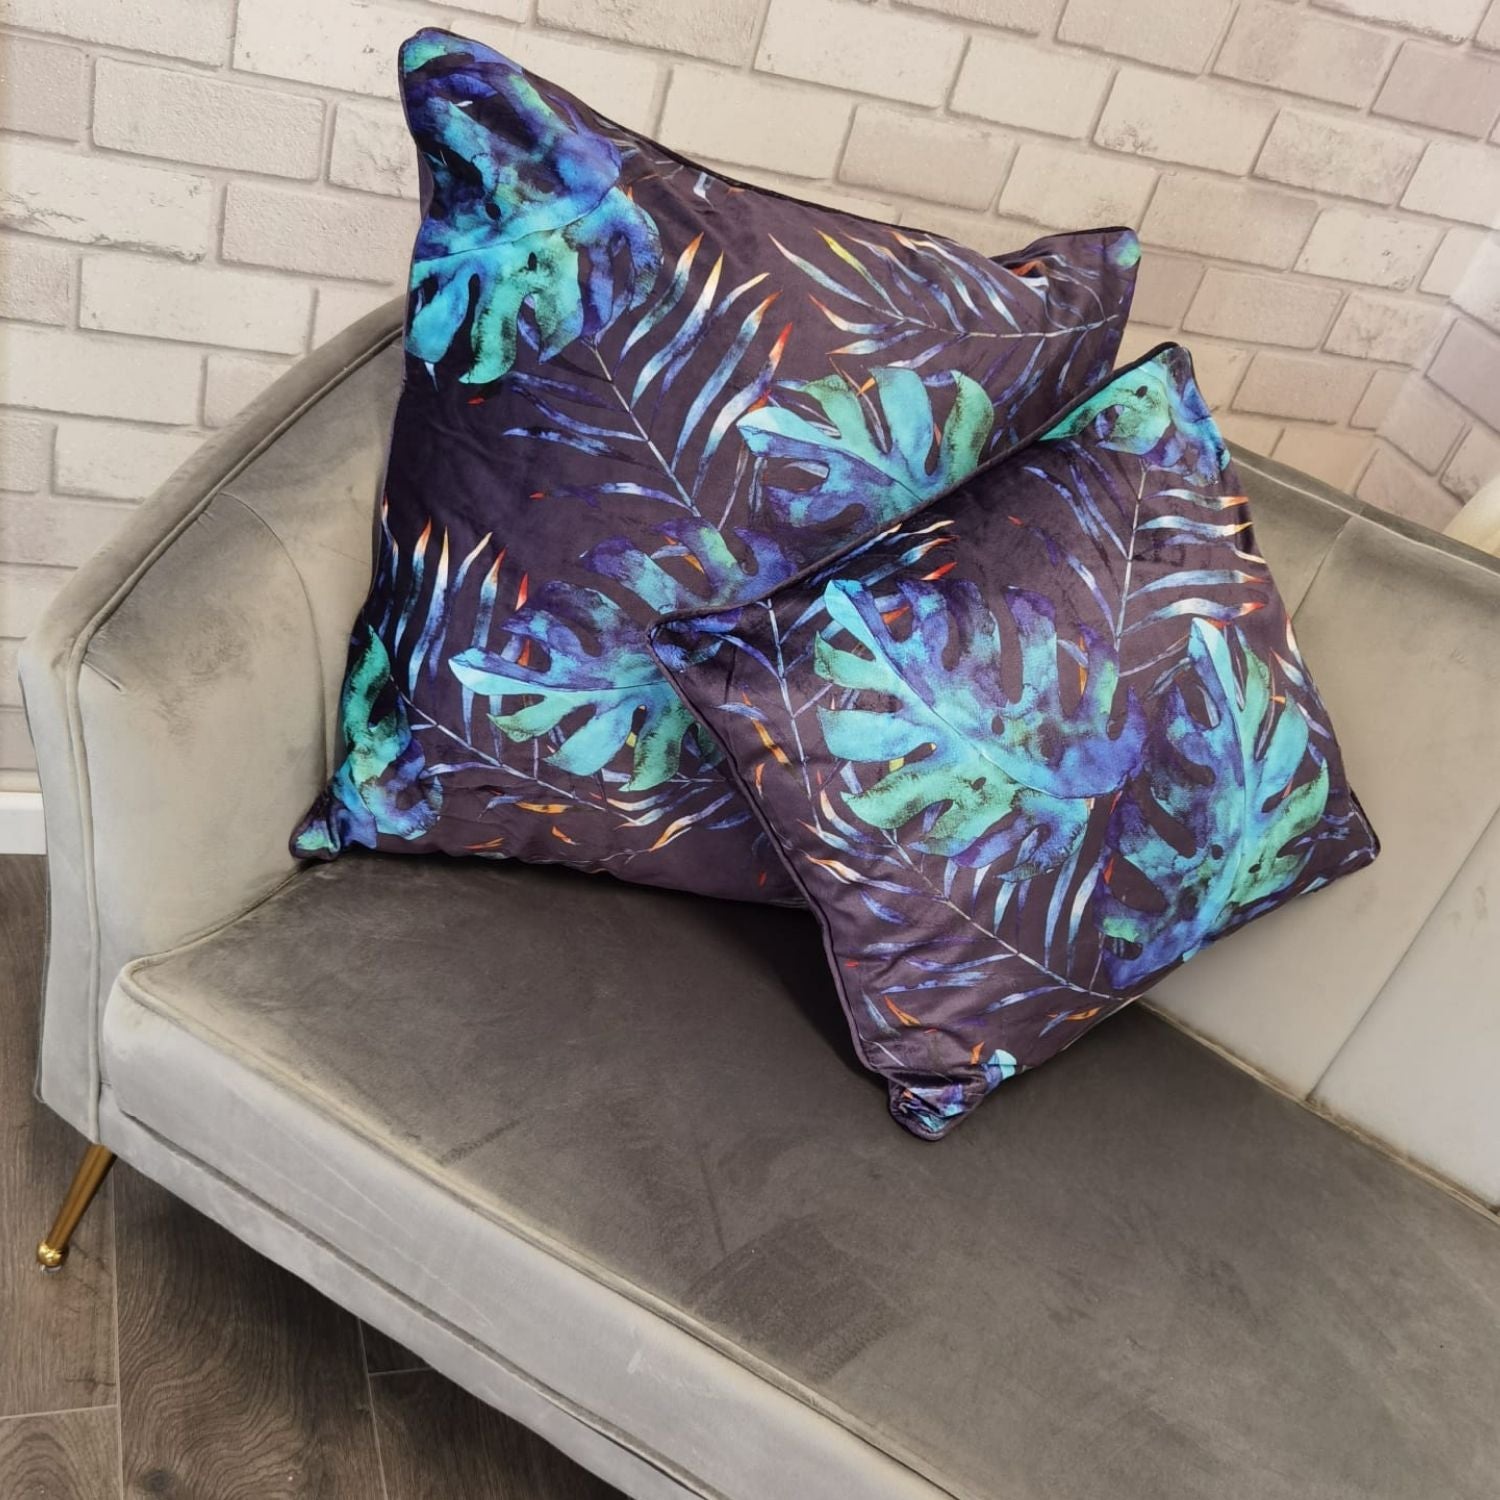 The Home Living Room Printed Piped Cushion Cover - 24x24&